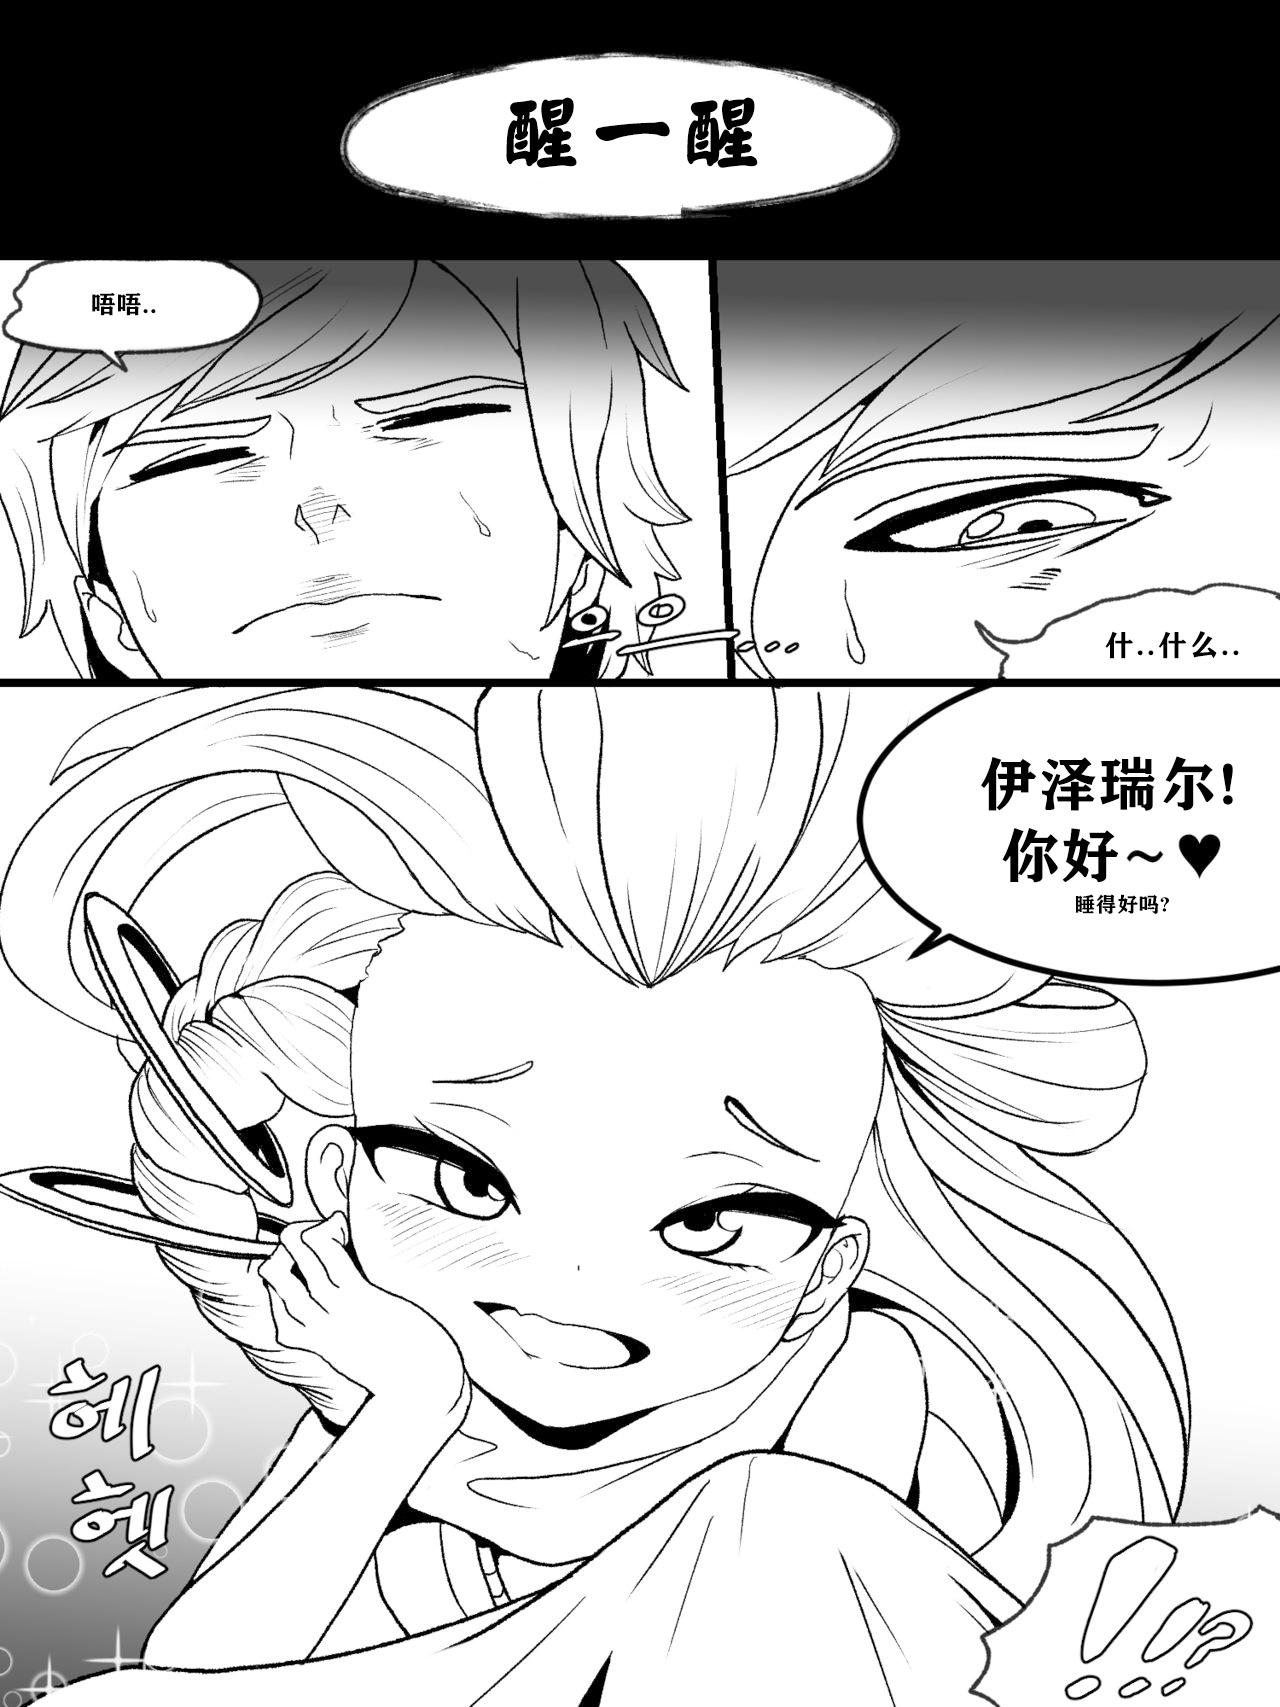 Nice Ass The reality in the starlight | 星光中的真实 - League of legends Blackcock - Page 4